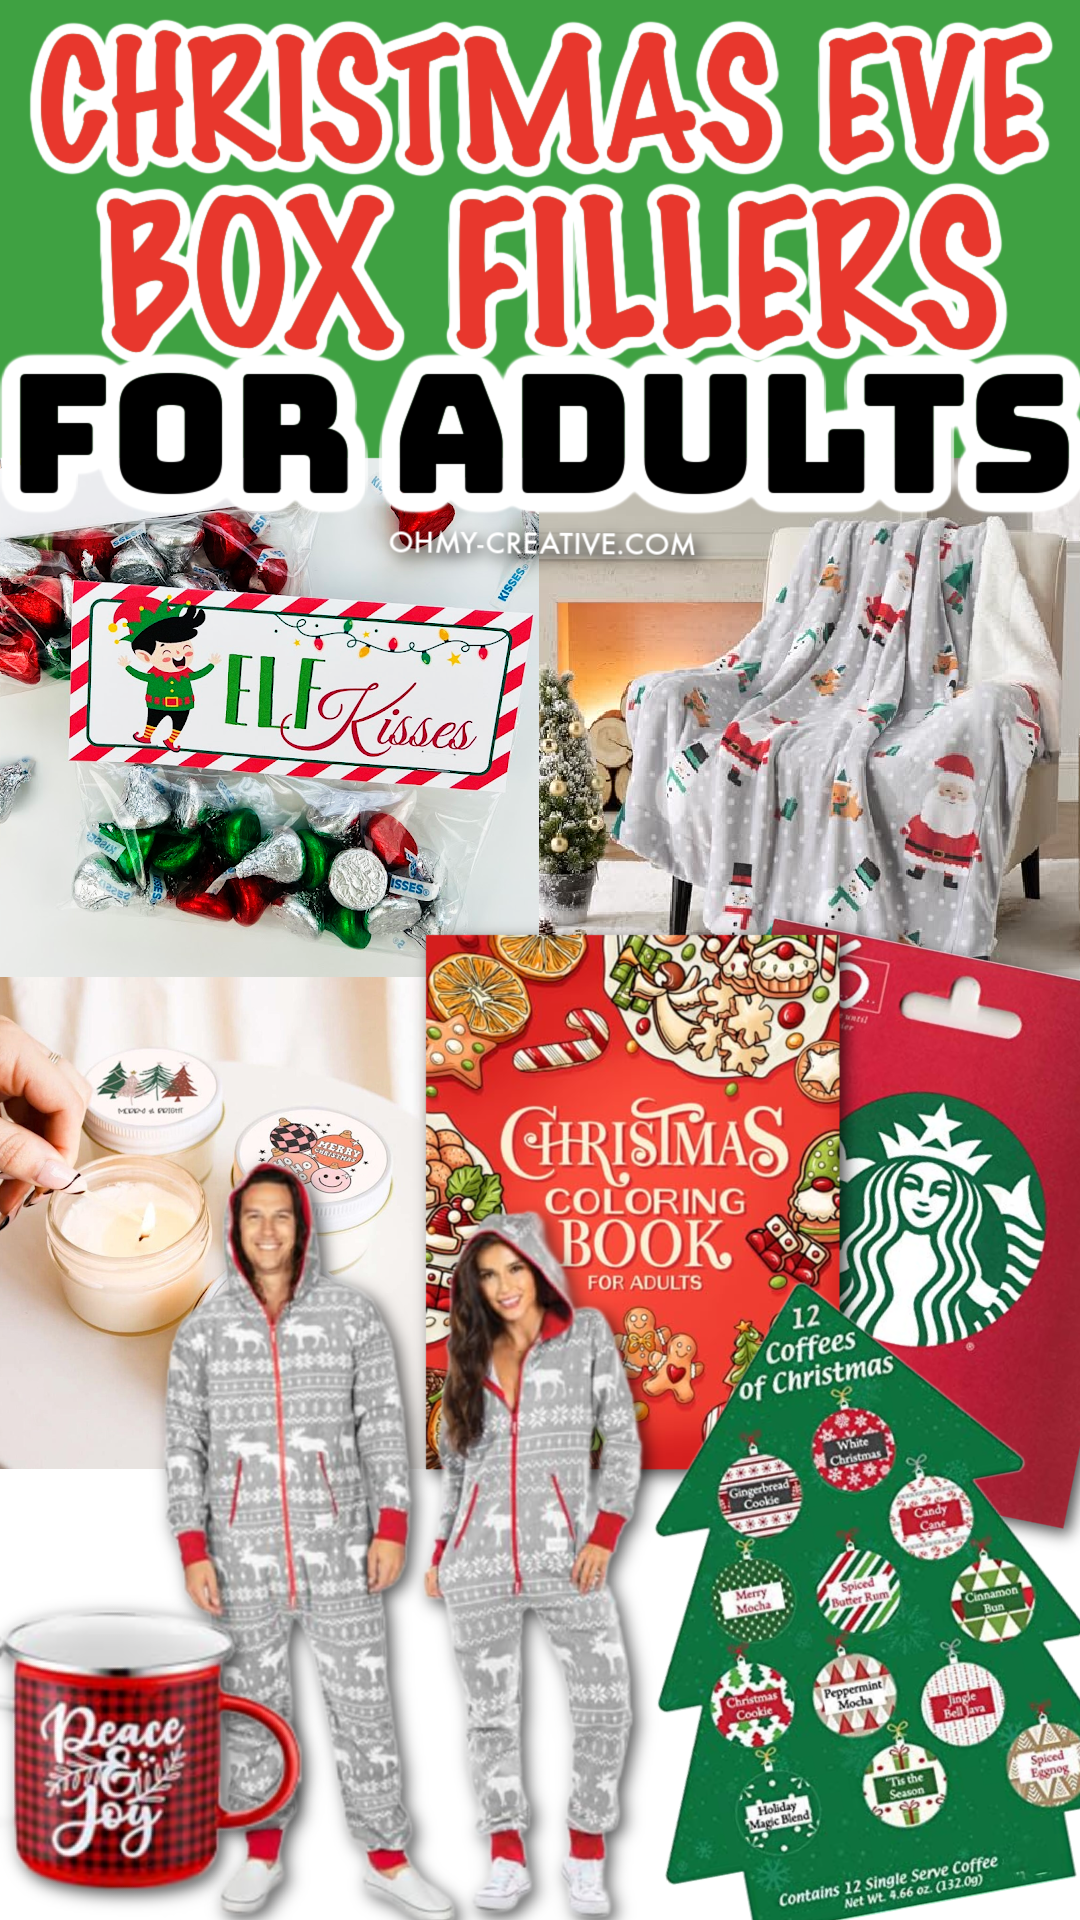 A collage of Christmas Eve Box fillers for adults.